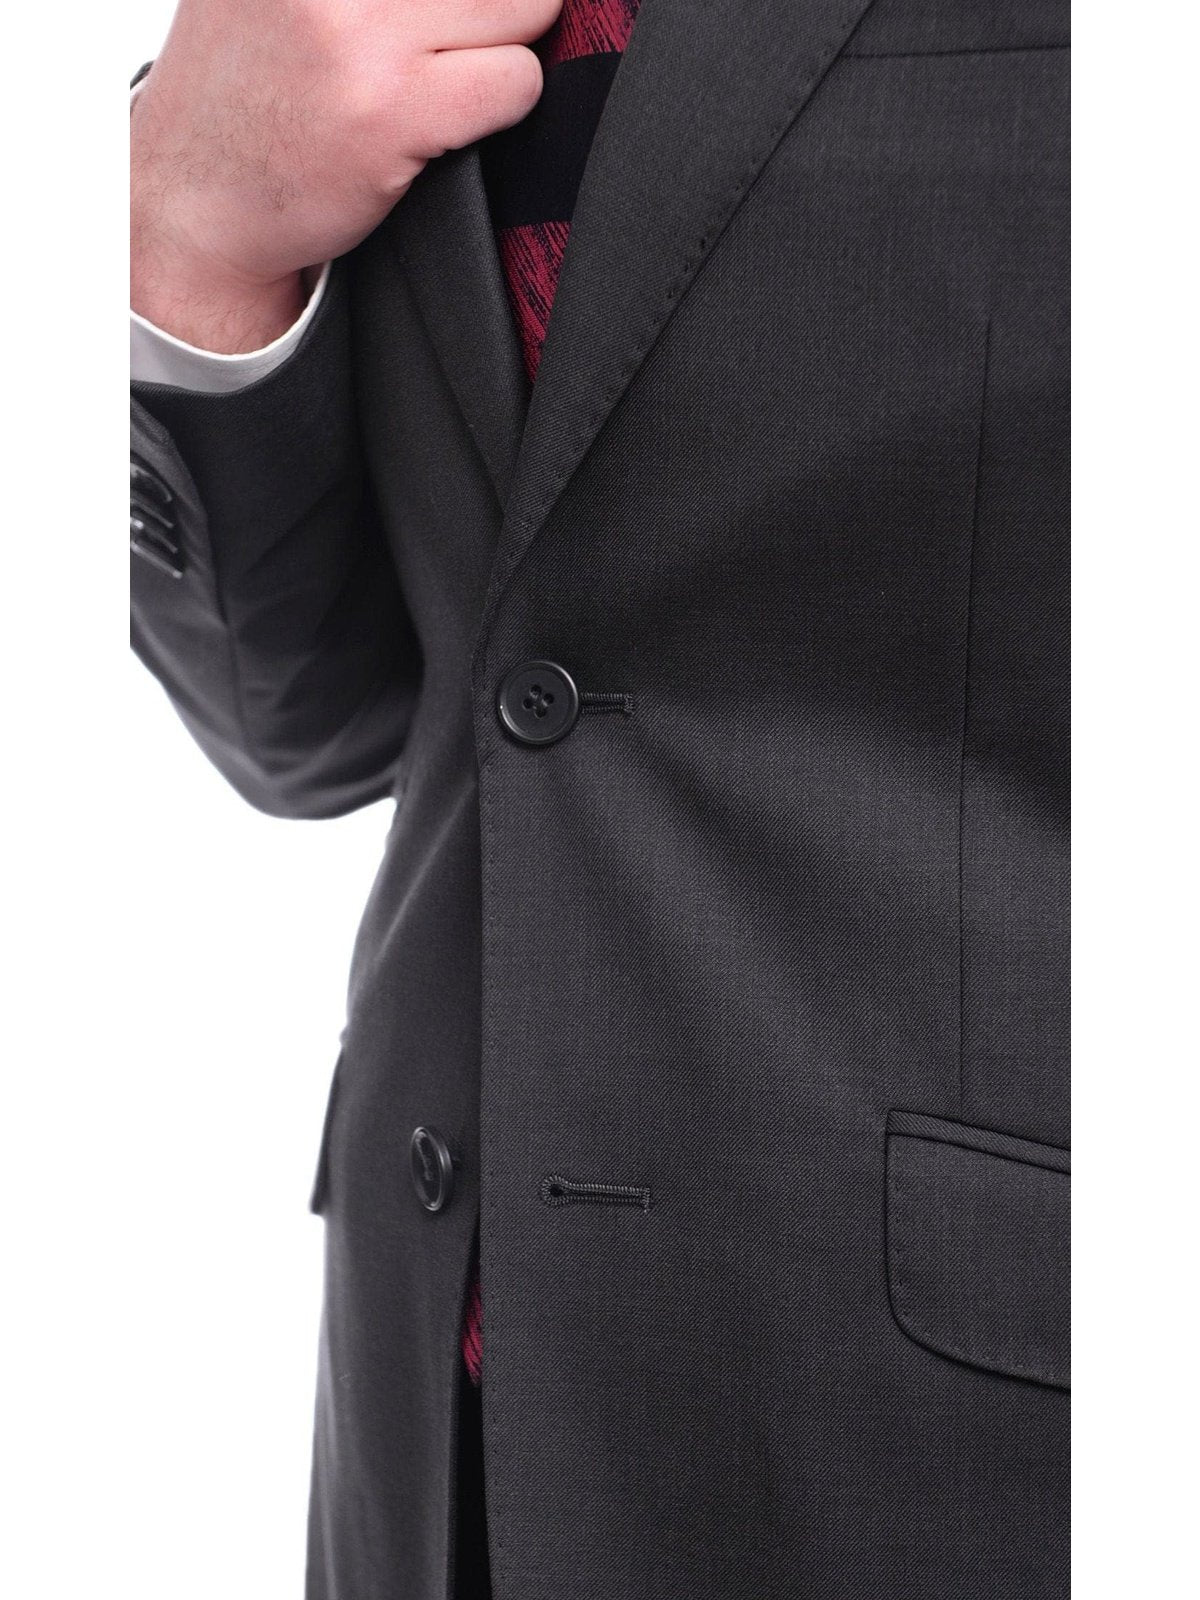 Ideal TWO PIECE SUITS Ideal Slim Fit Solid Charcoal Gray Two Button Wool Suit With Peak Lapels